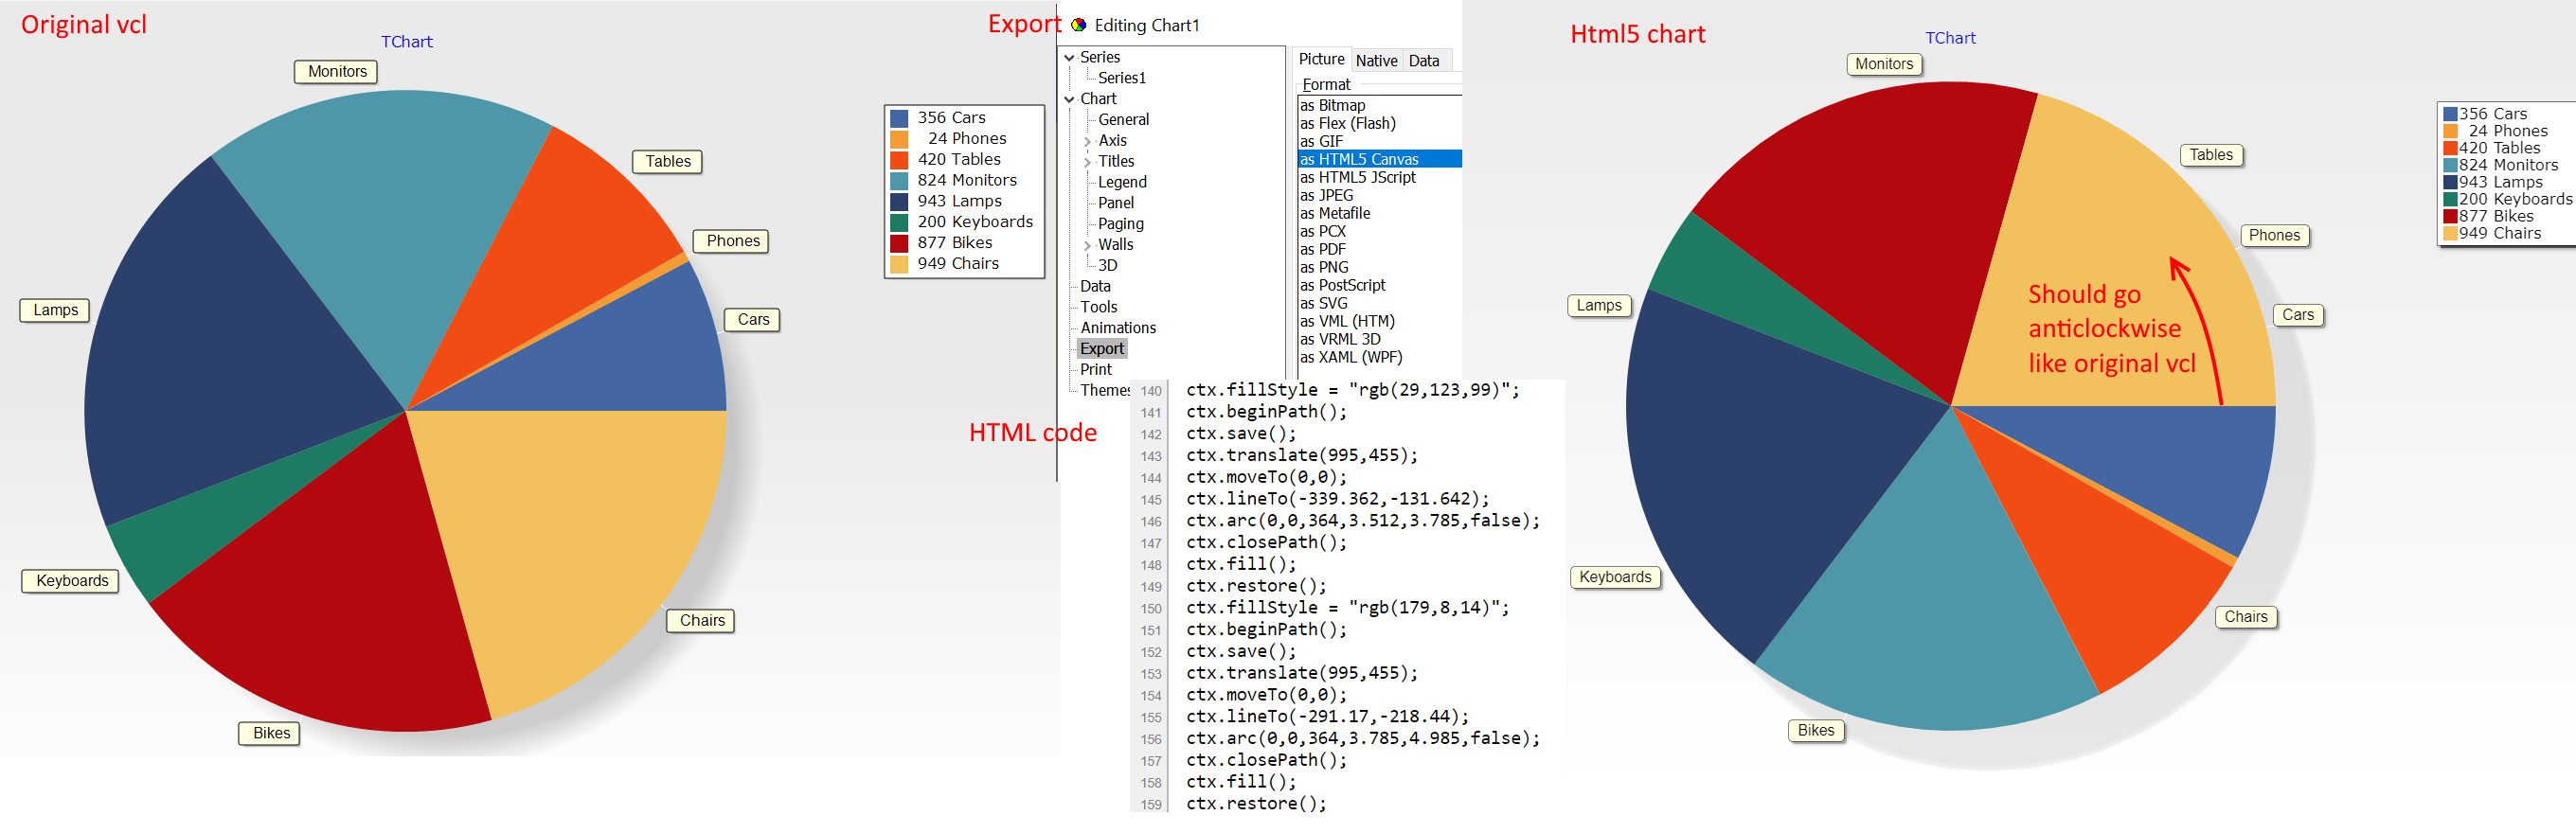 Export as HTML5 Canvas details.png